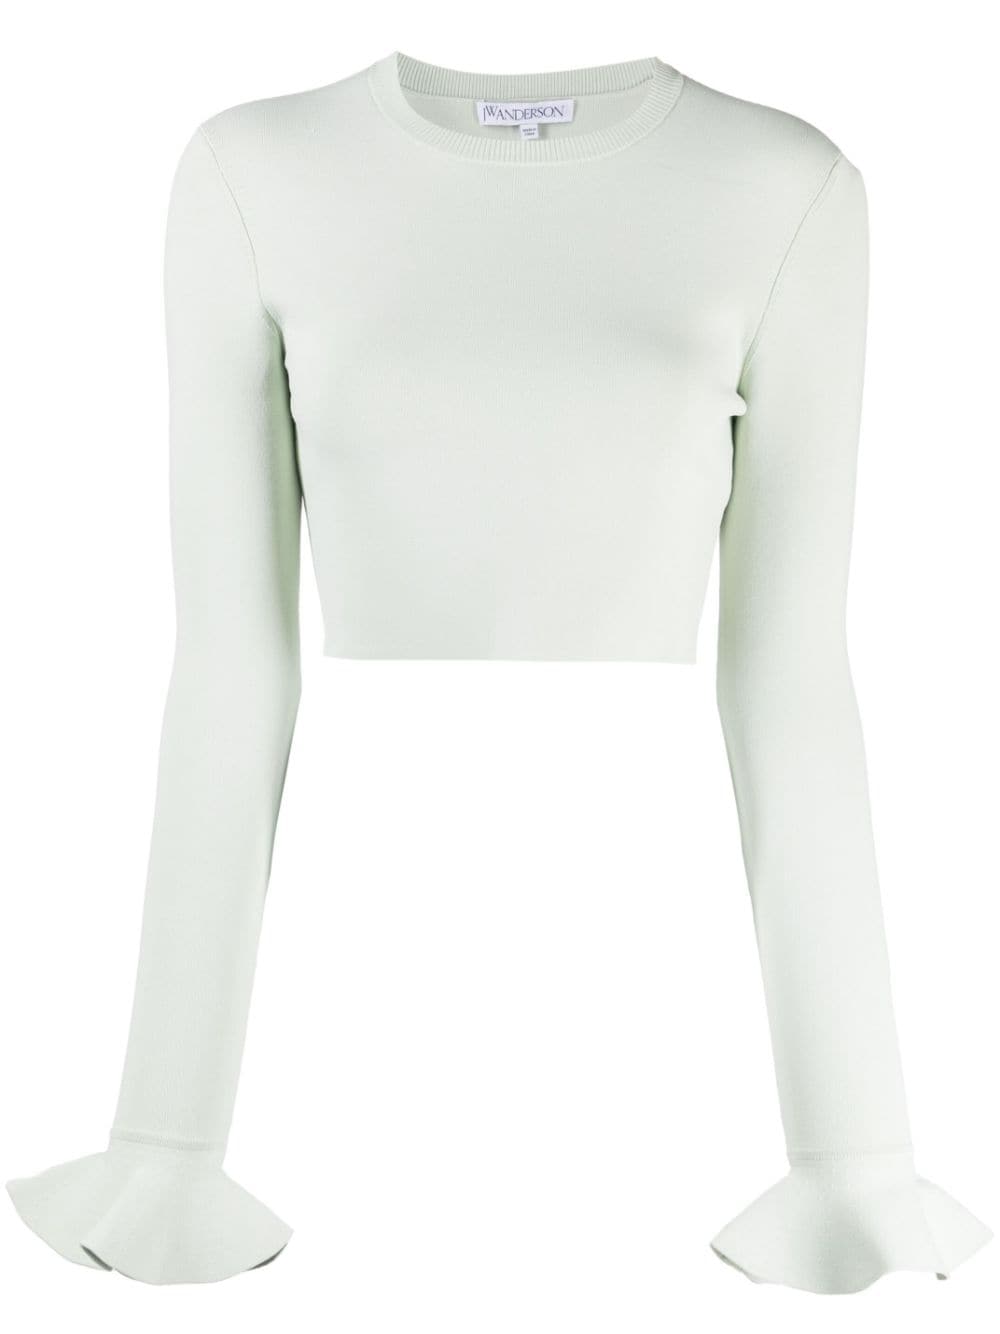 JW Anderson ruffle-detail cropped top - Green